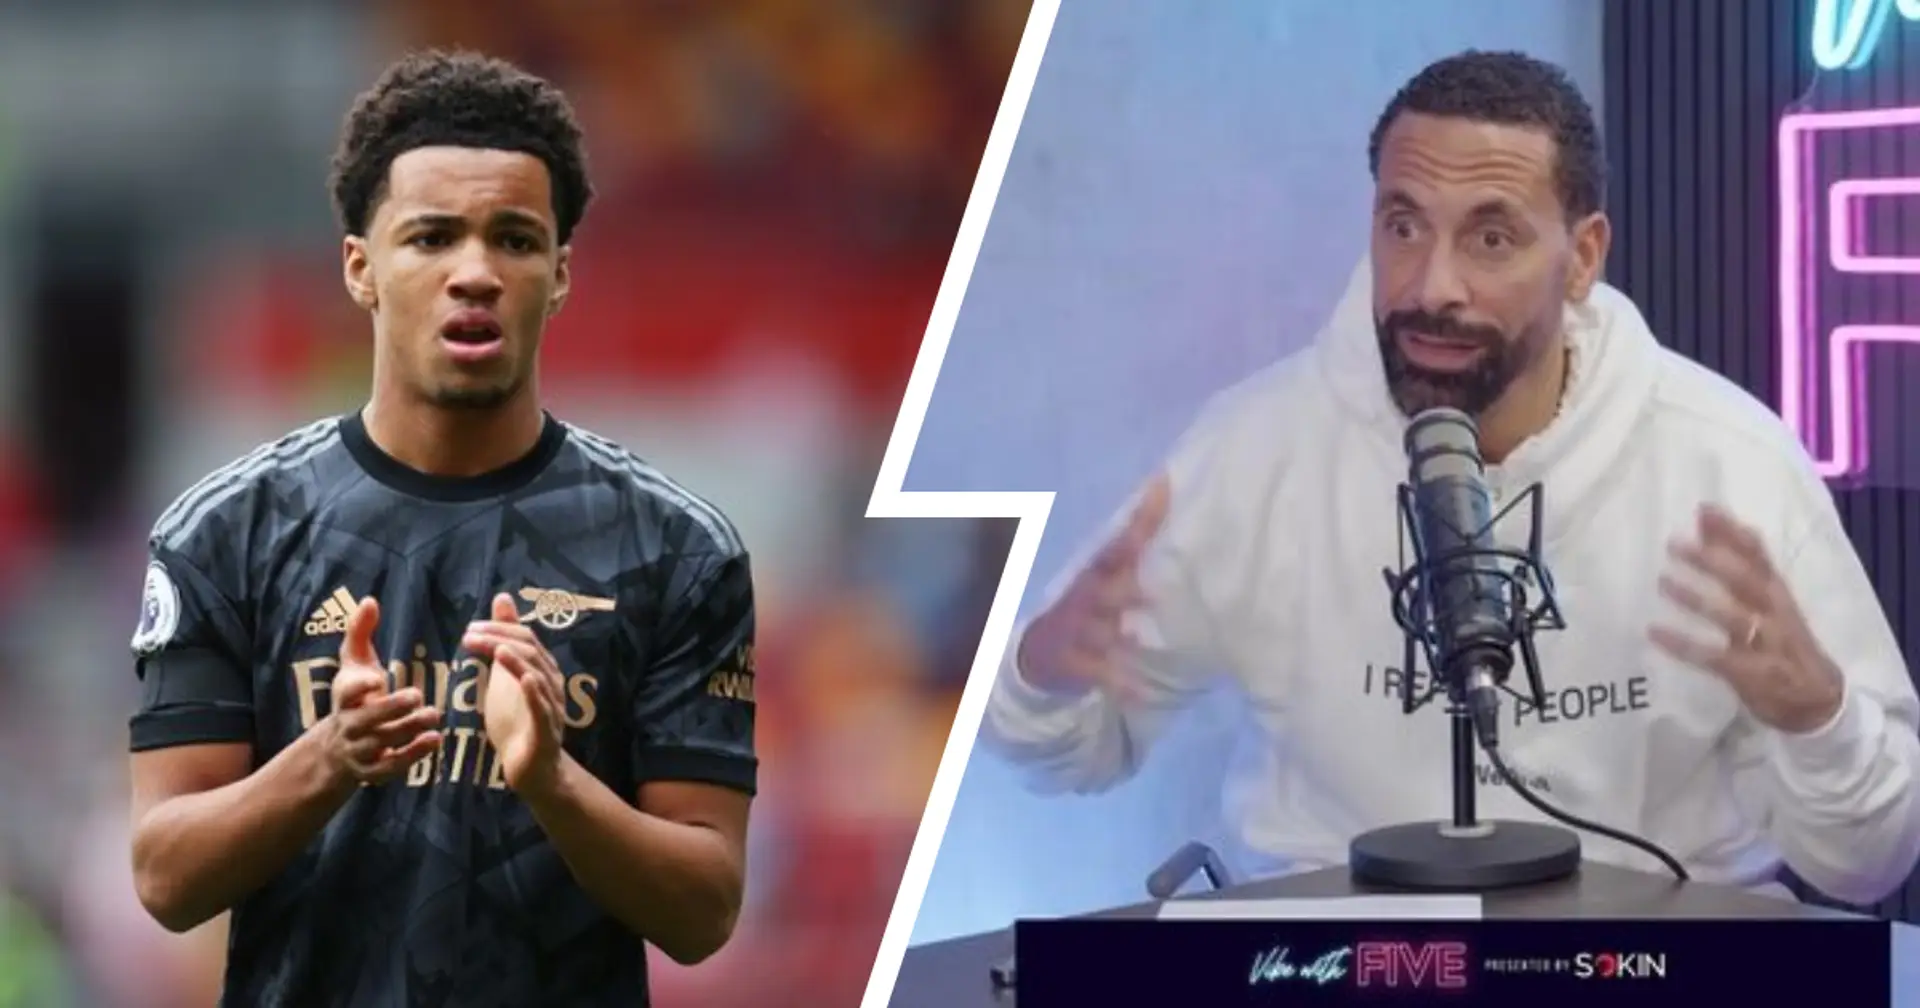 'There's no doubting this kid's ability': Rio Ferdinand reveals what Arsenal coaches think about Ethan Nwaneri